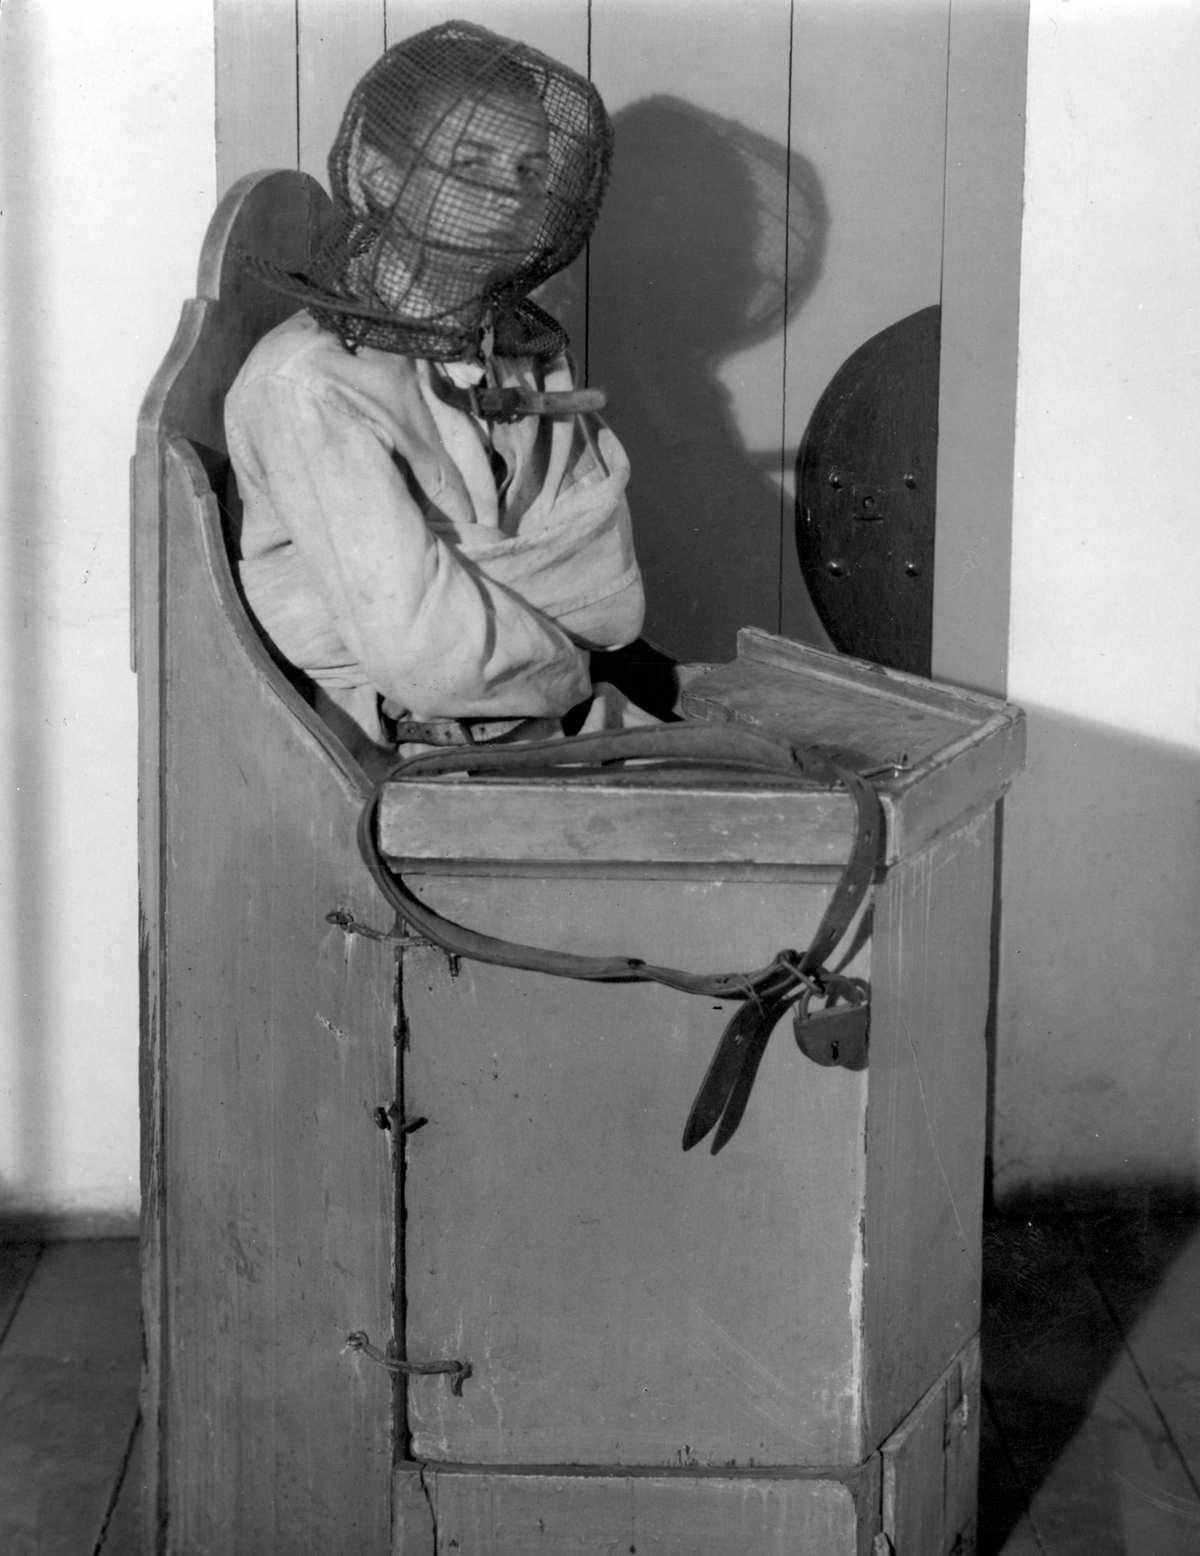 A "Lunatics Chair" given to patients who had poor behavior or wild outbursts in a Dutch mental hospital in 1938.